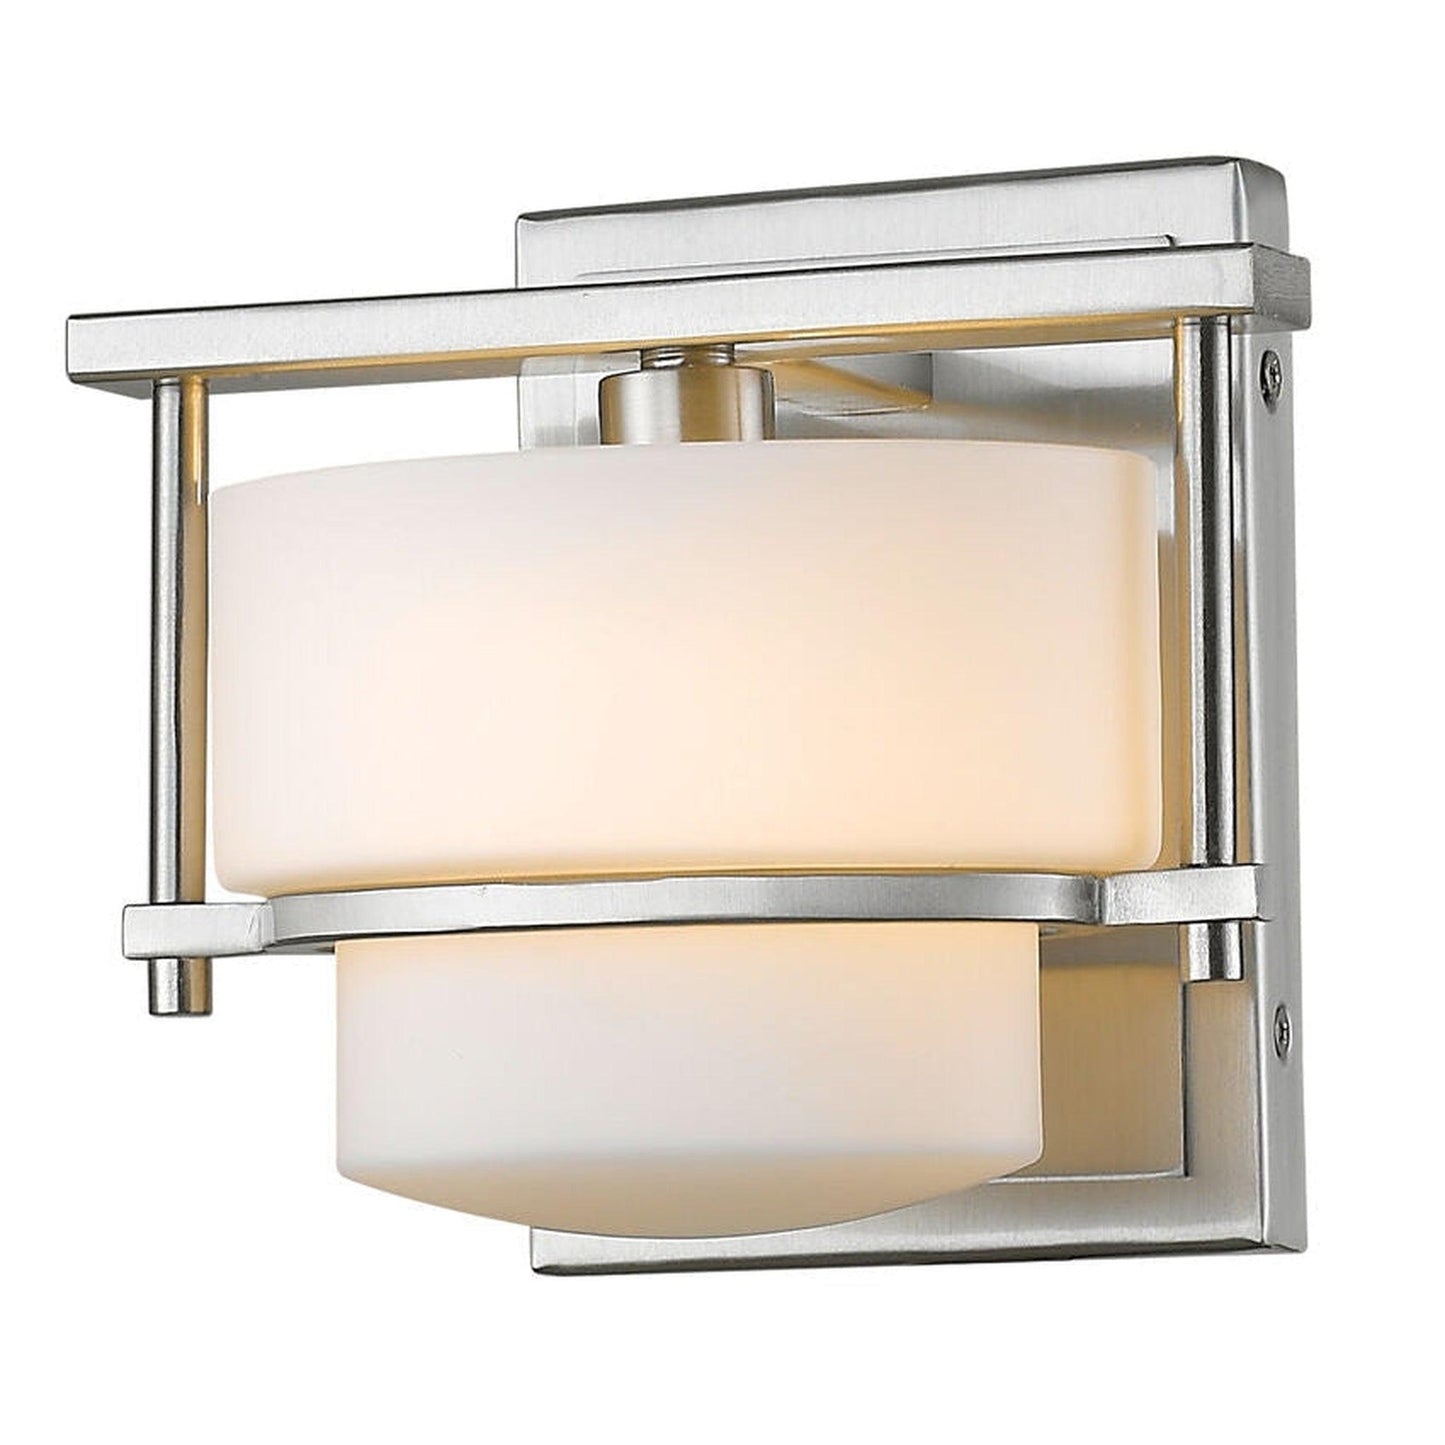 Z-Lite Porter 6" 1-Light Brushed Nickel Wall Sconce With Matte Opal Glass Shade